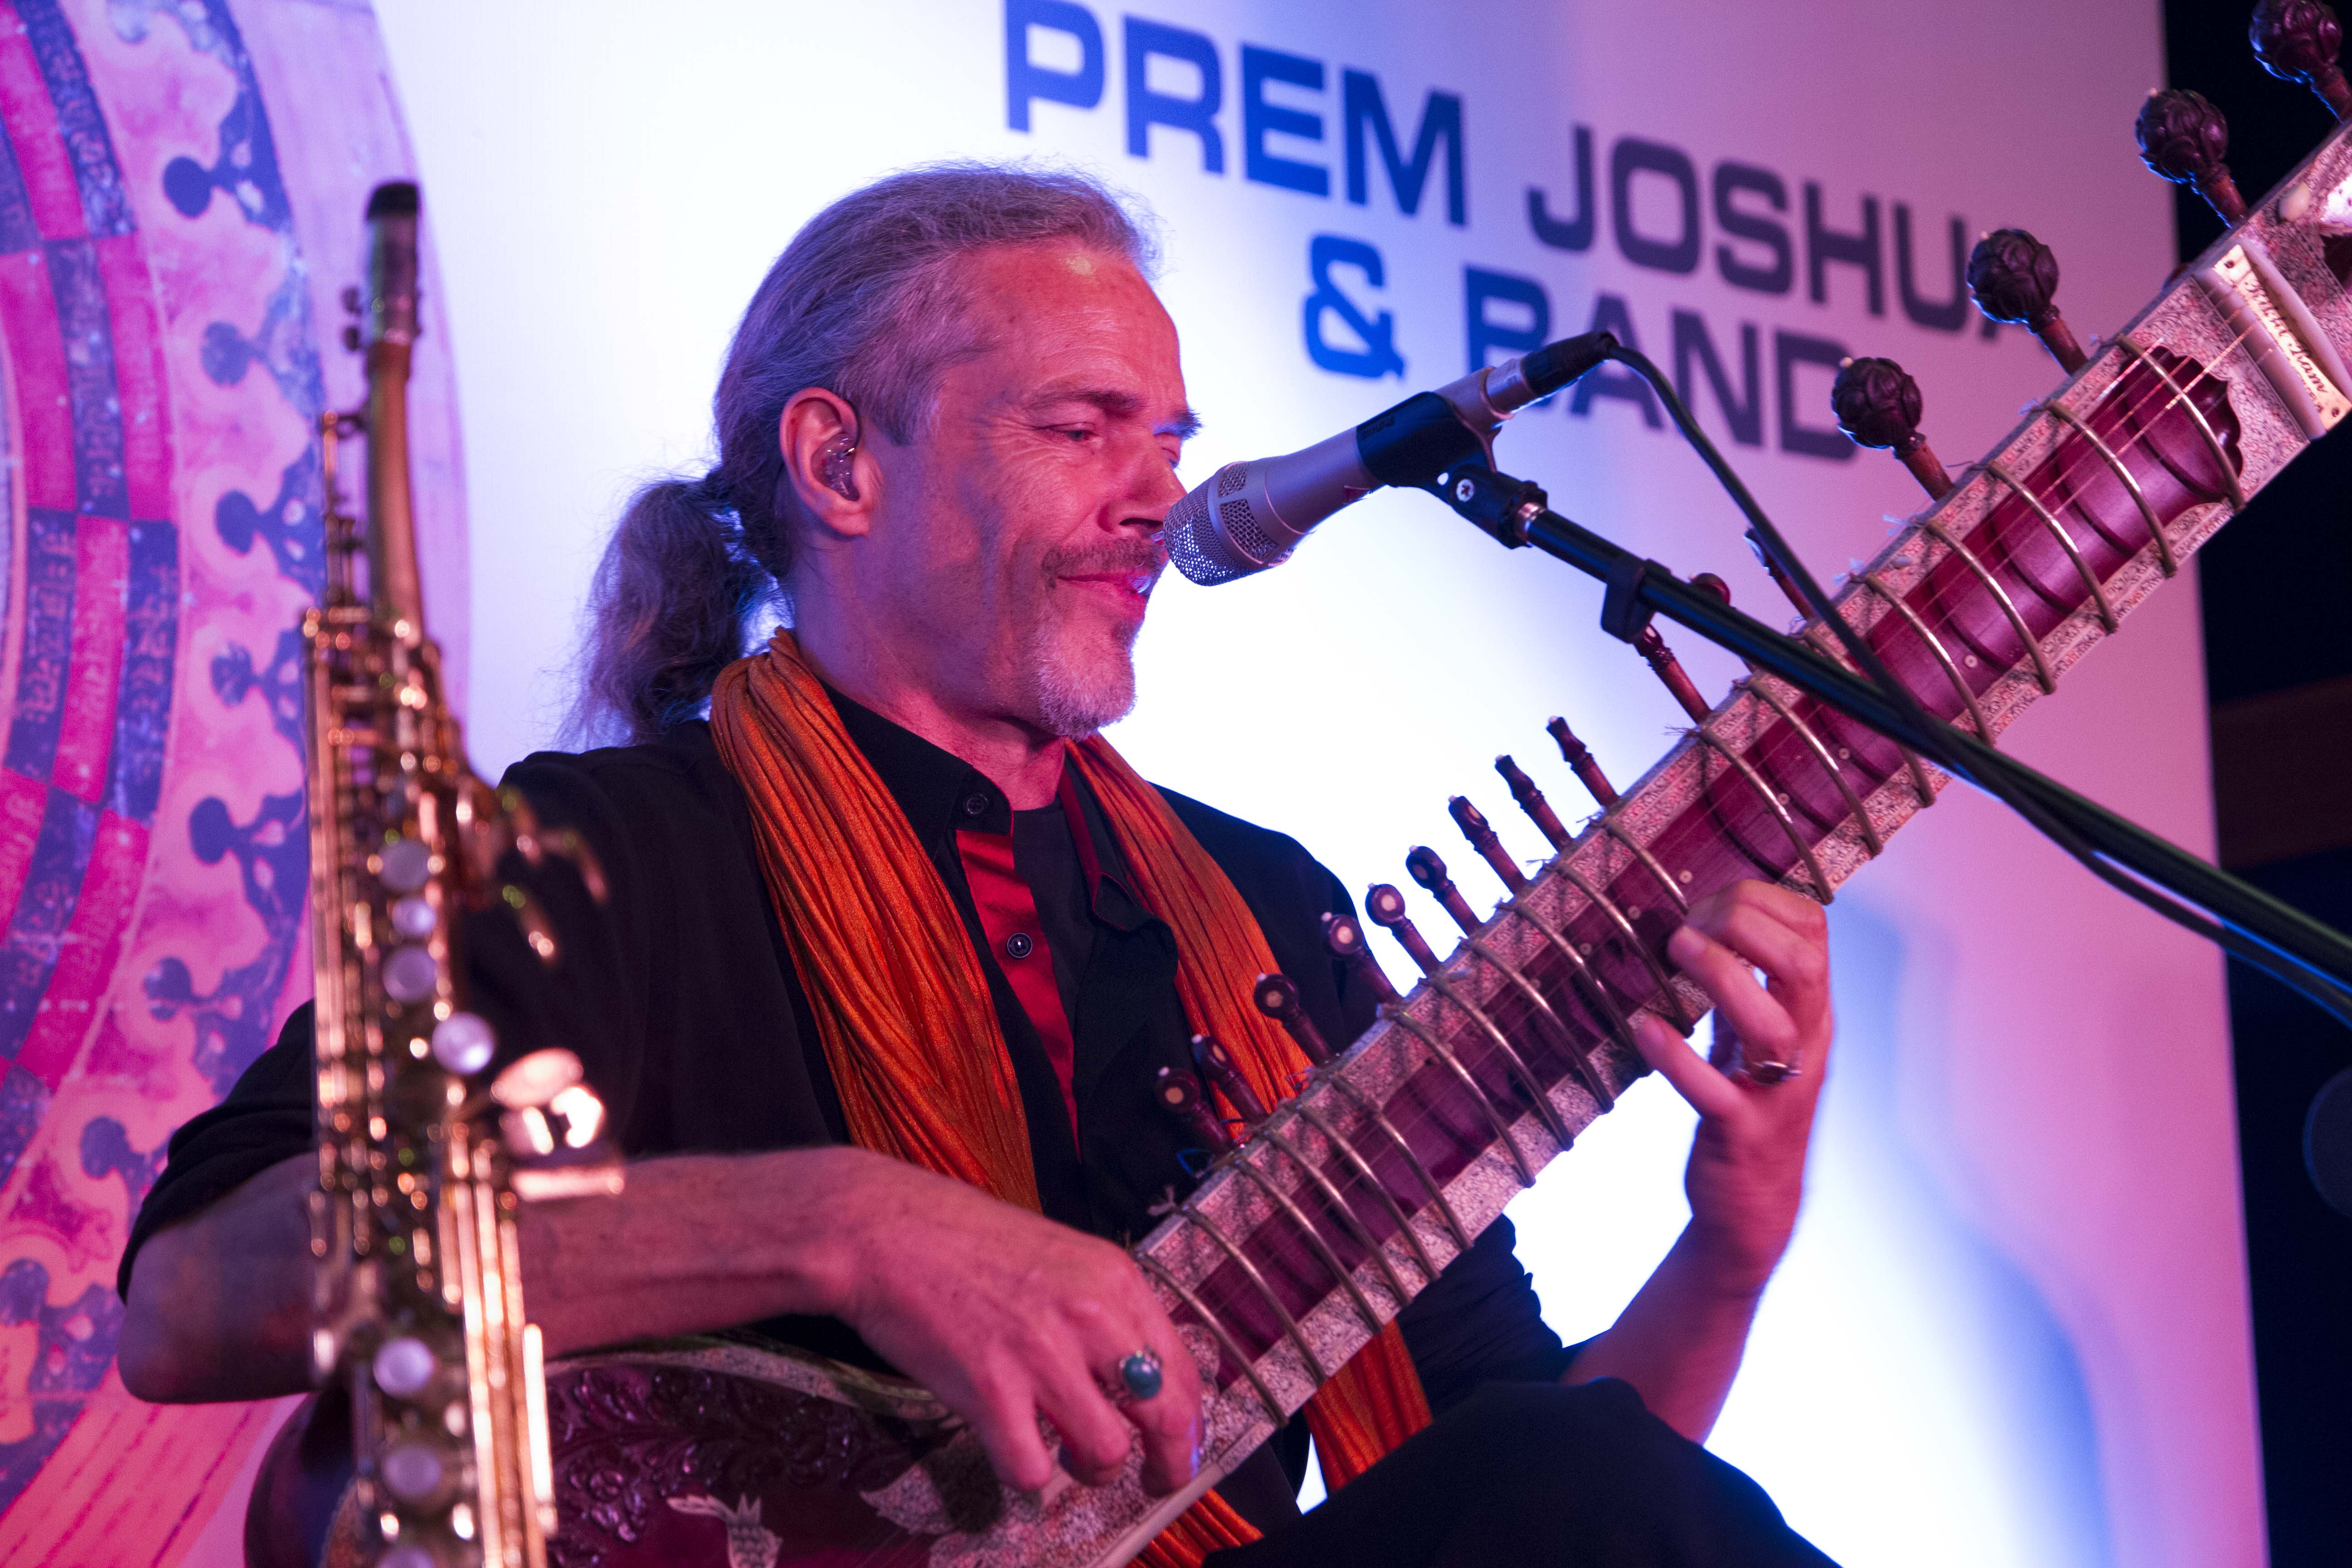 Read more about the article PREM JOSHUA & BAND LIVE